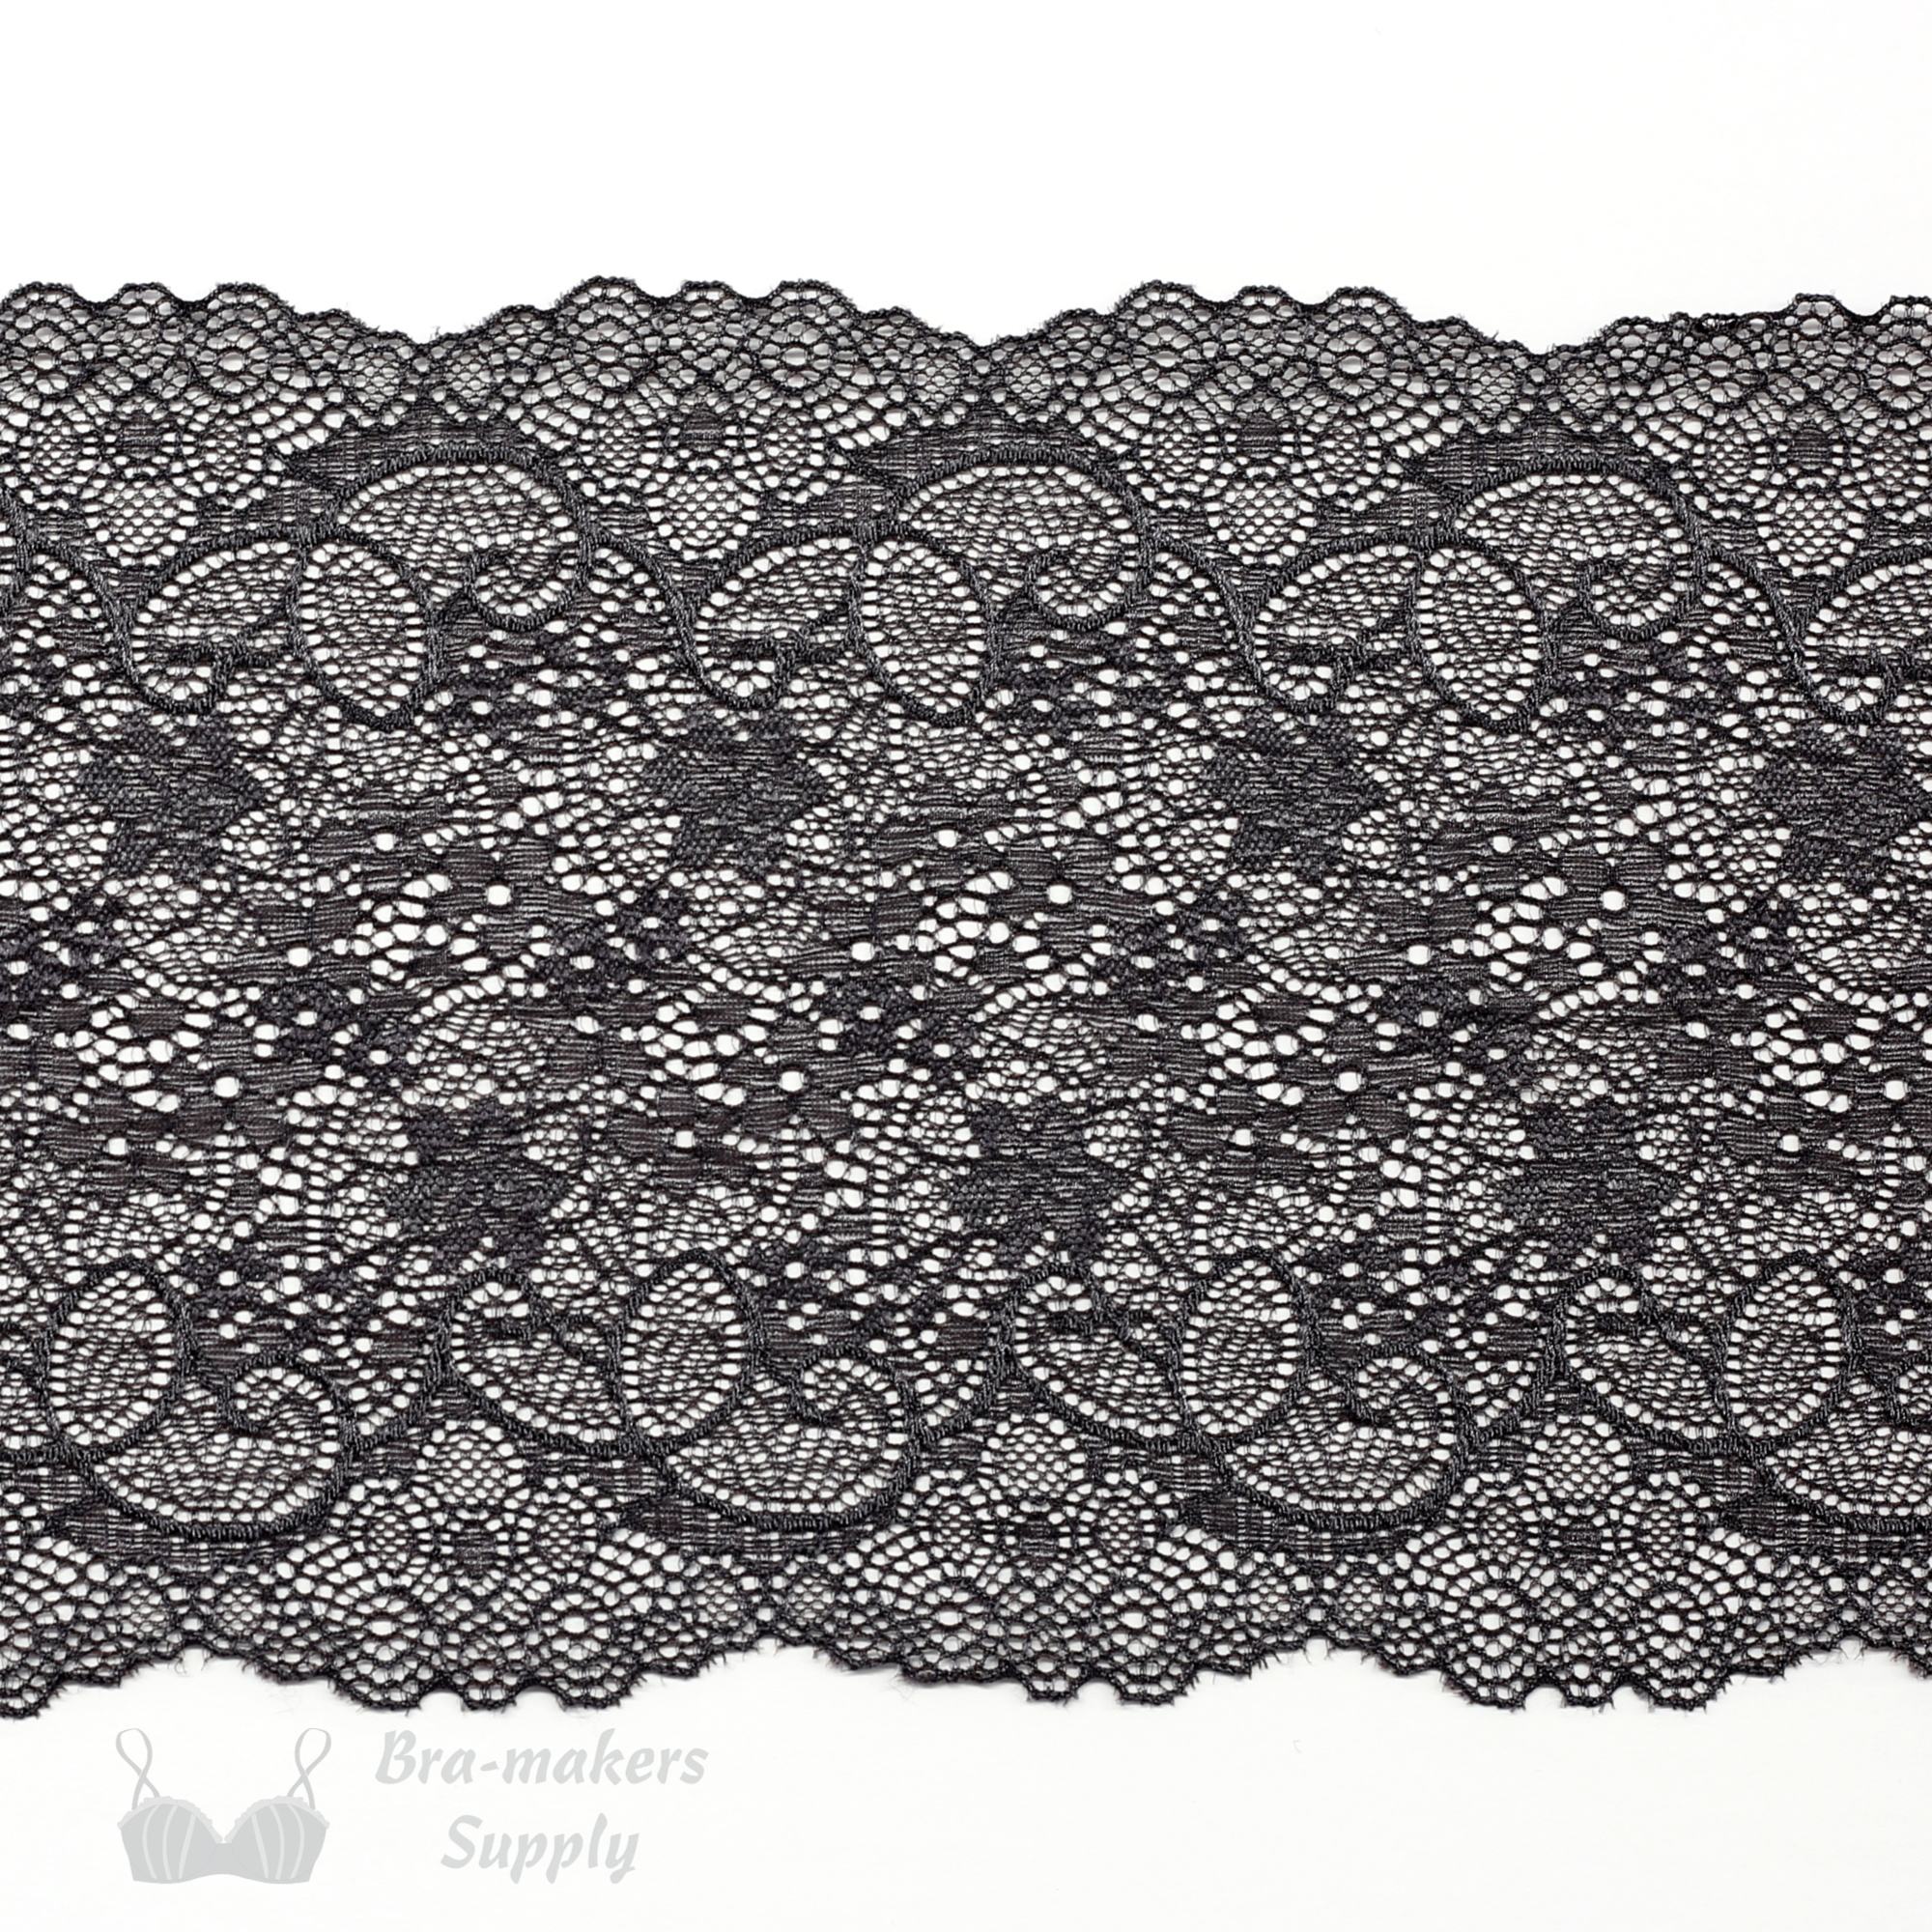 https://www.braandcorsetsupplies.com/wp-content/uploads/Six-Inch-Pewter-Swirl-Floral-Stretch-Lace-Bra-makers-Supply-.jpg